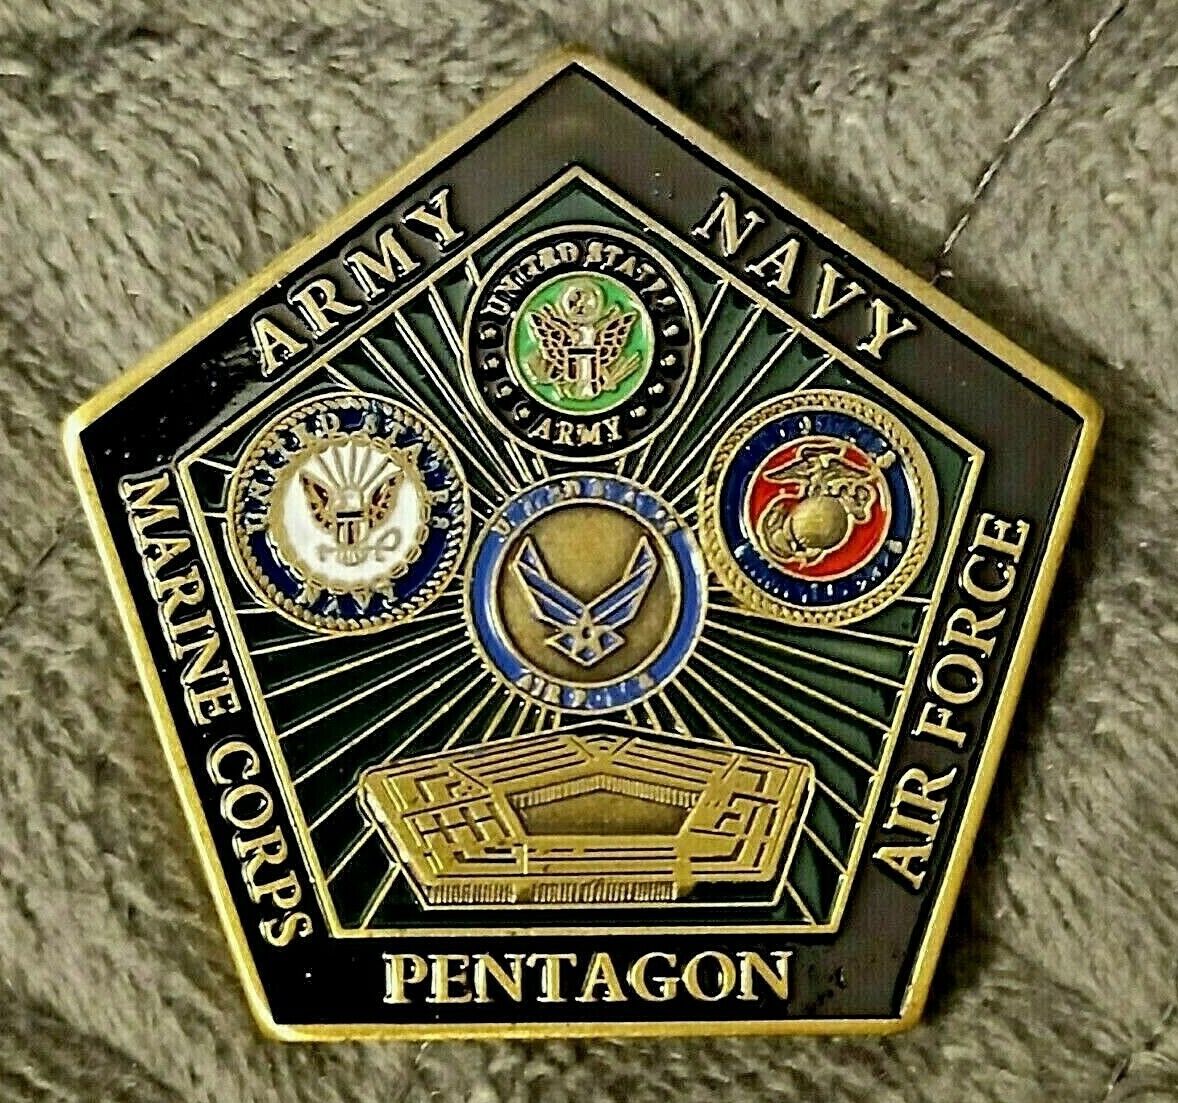 U.S. Pentagon Challenge Coin Dept of Defense Collectible coin Military Gift Coin